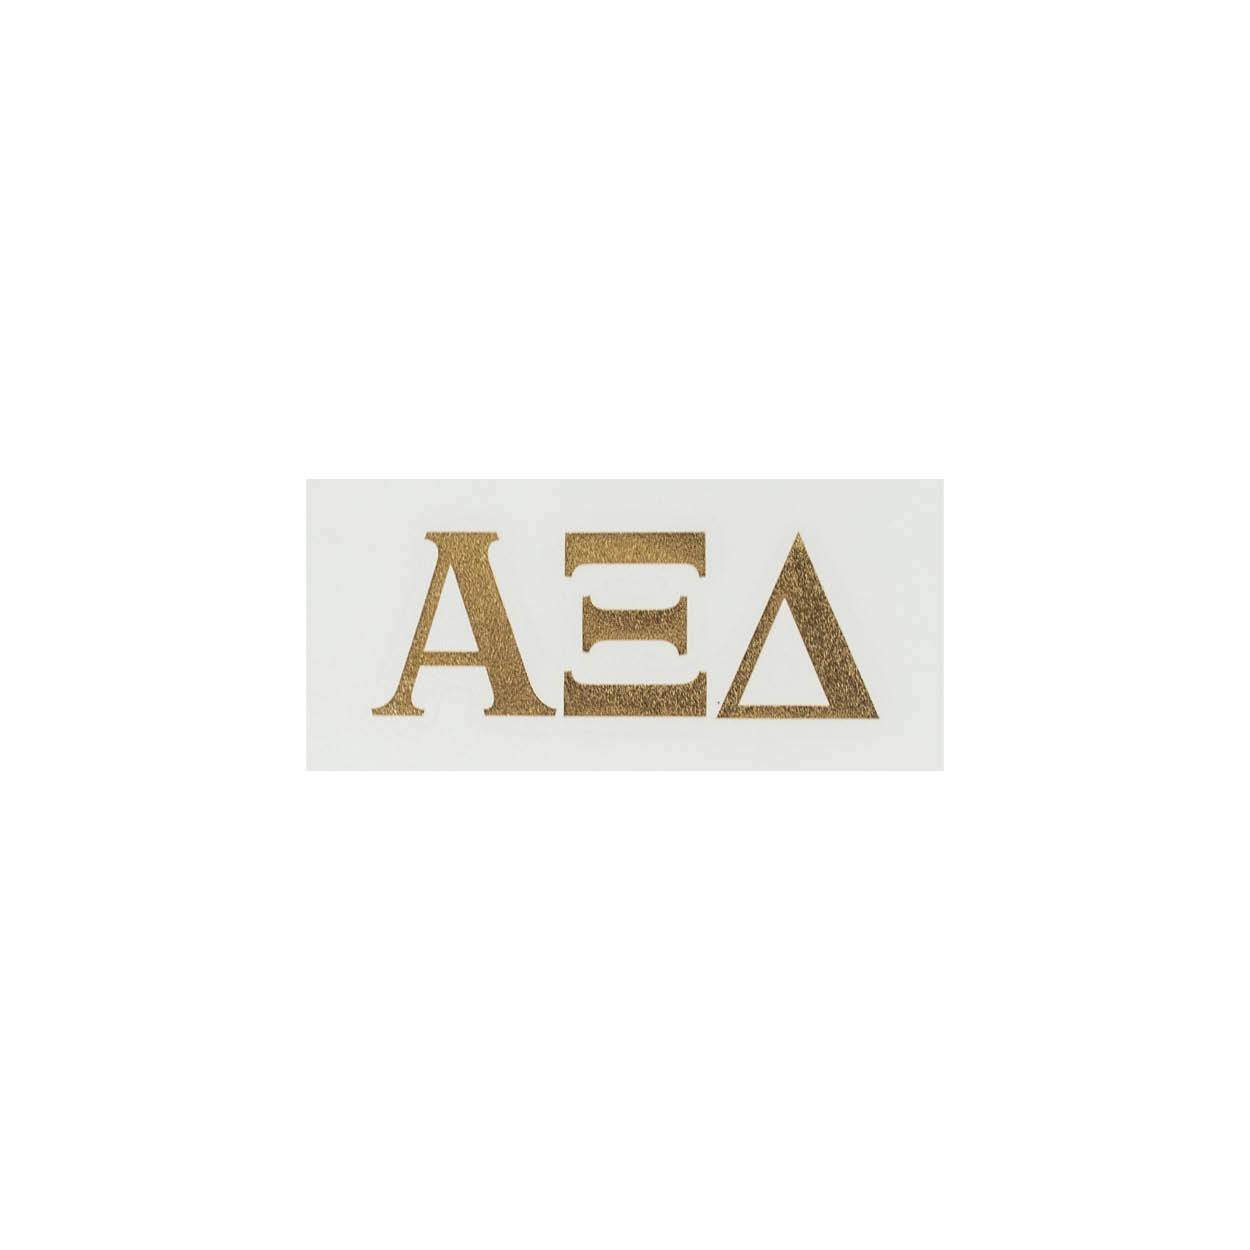 Gold Foil Decal Greek in Alpha Xi Delta at Wrapsody